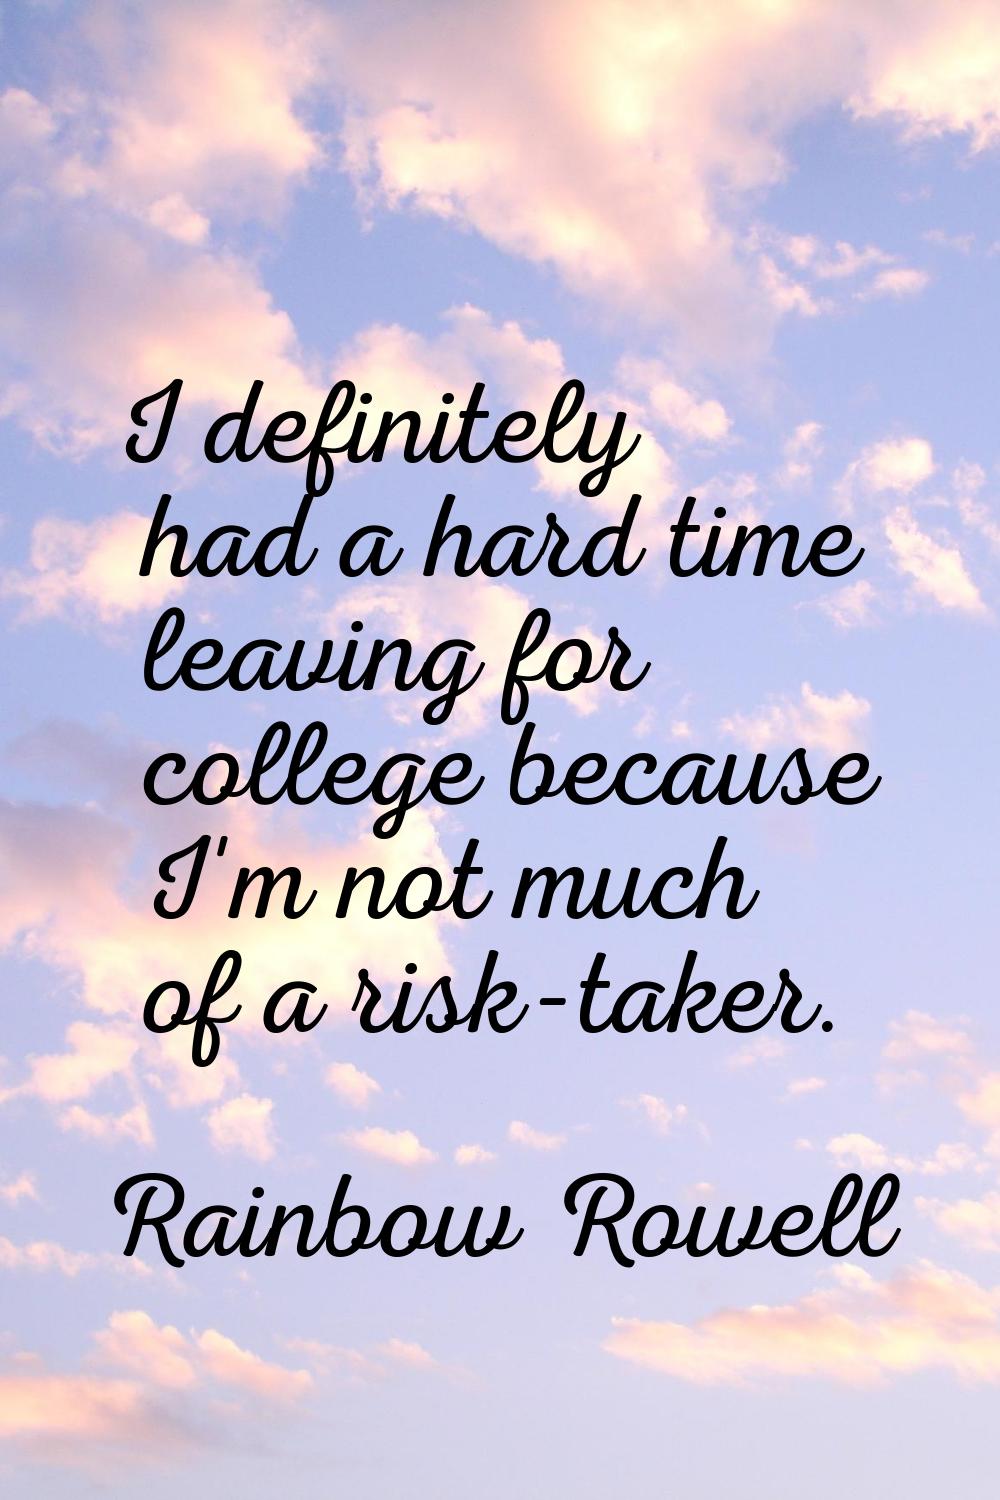 I definitely had a hard time leaving for college because I'm not much of a risk-taker.